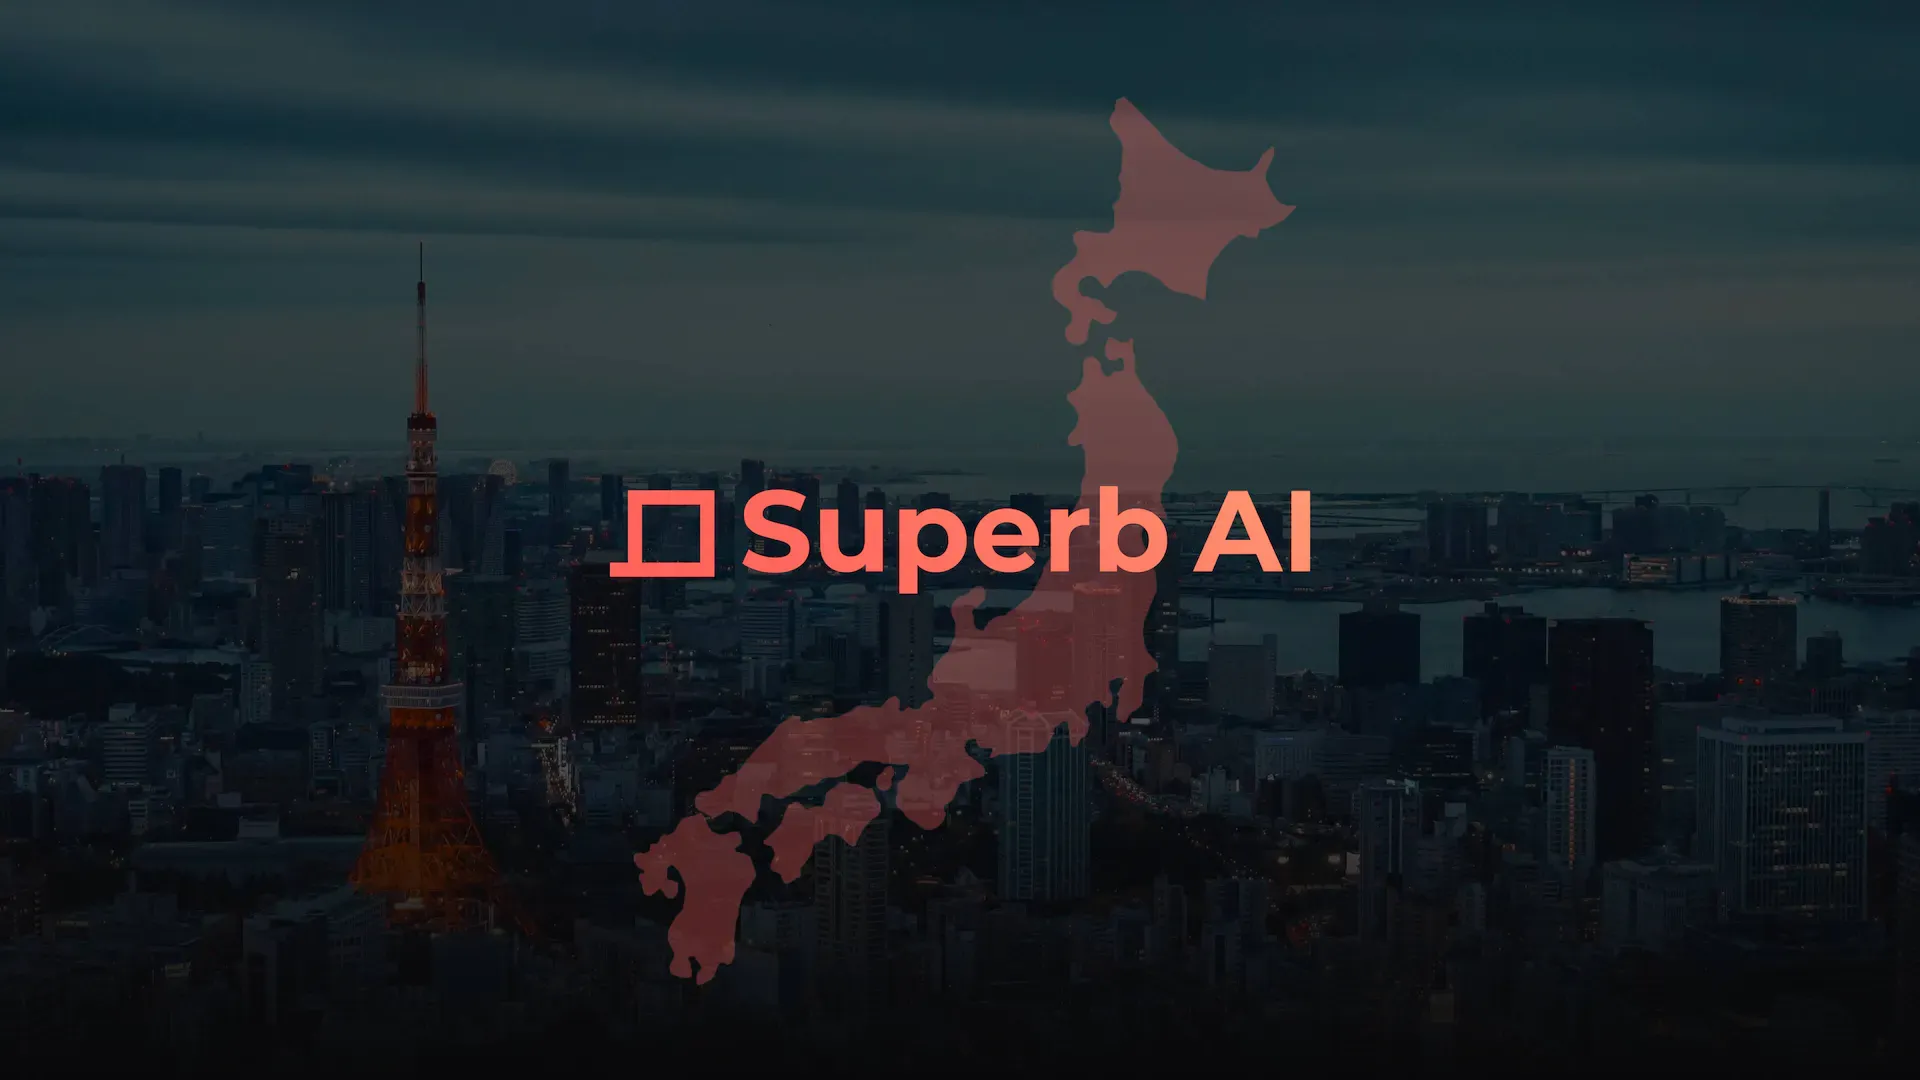 Superb AI is proud to support businesses in Japan on their computer vision projects.